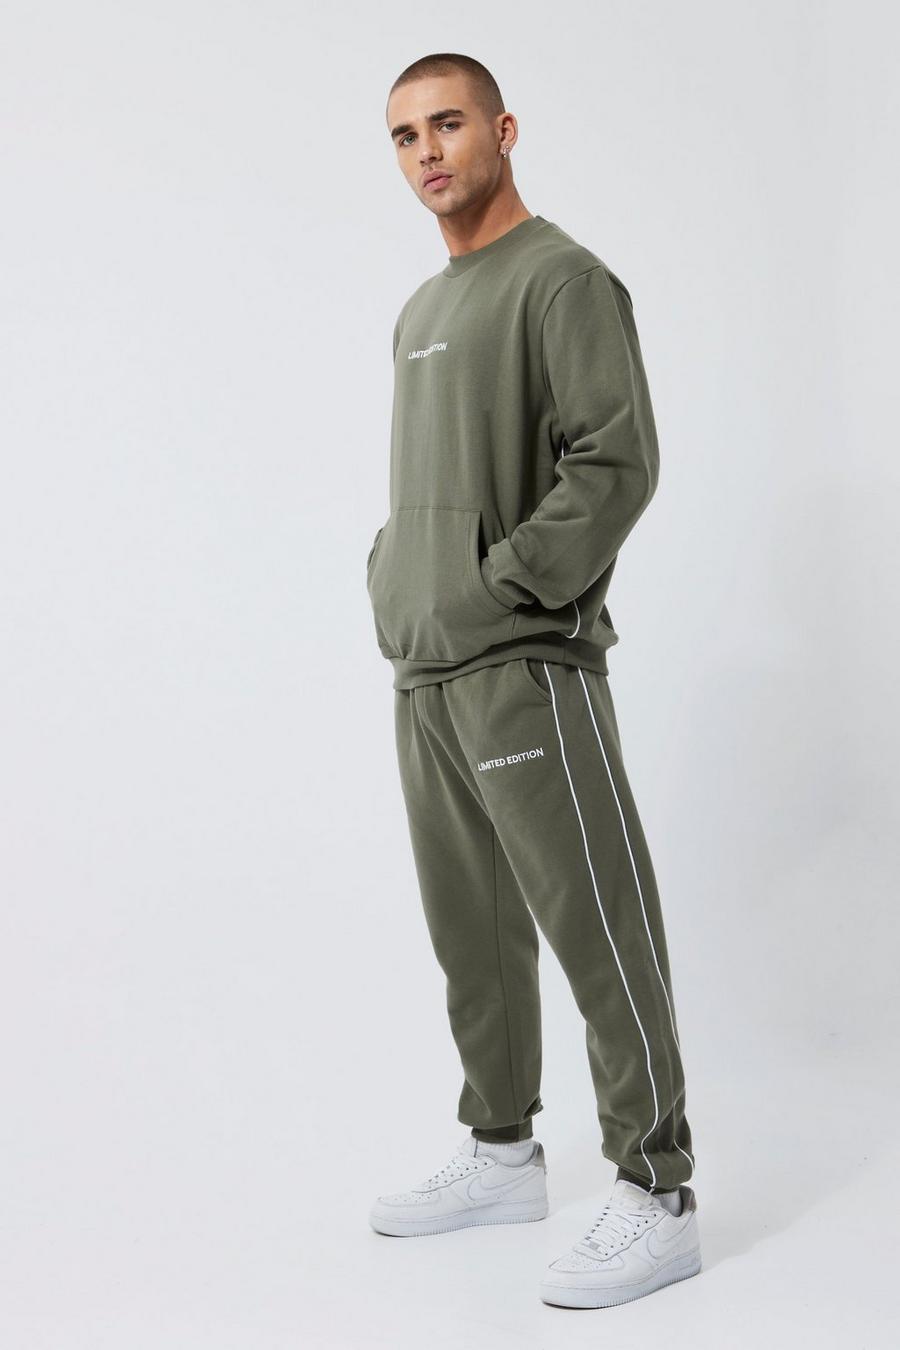 Olive green Lightweight Limited Piping Sweatshirt Tracksuit